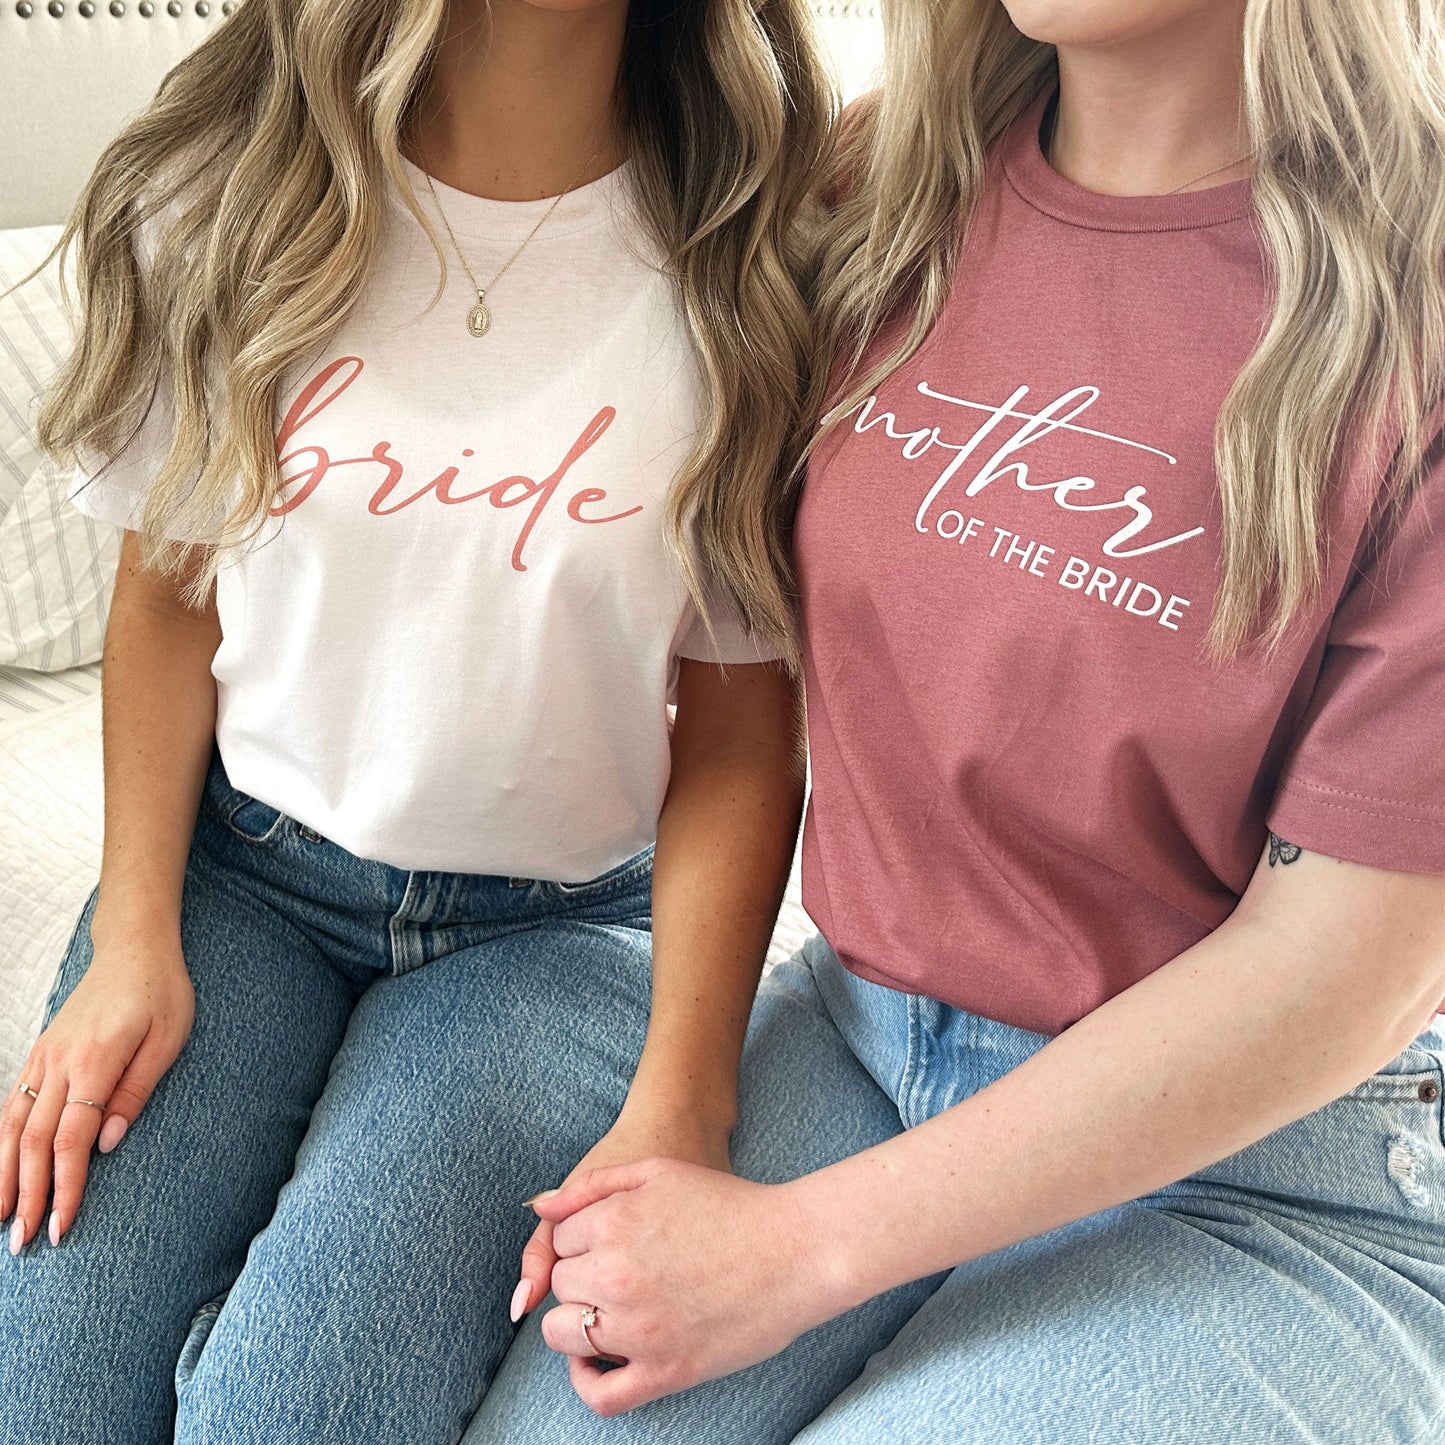 2 ladies waring bella and canvas crewneck tees one in white with bride printed and onw in mauve with mother of the bride printed across the chest